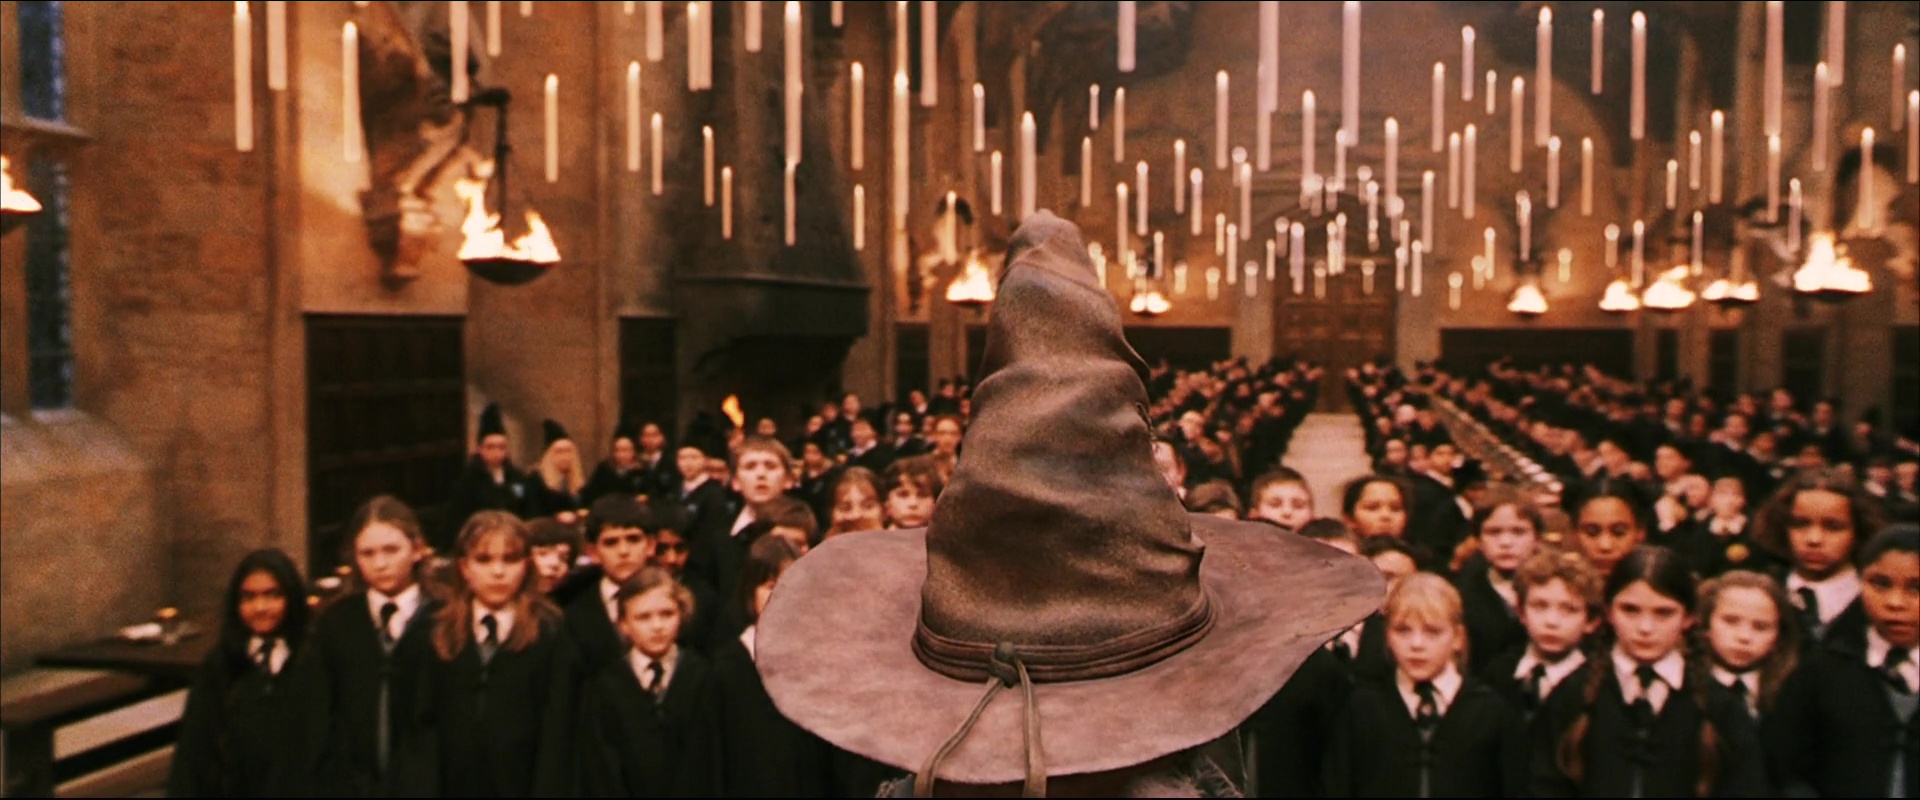 The Sorting Hat: Deciding Fate at Hogwarts 2